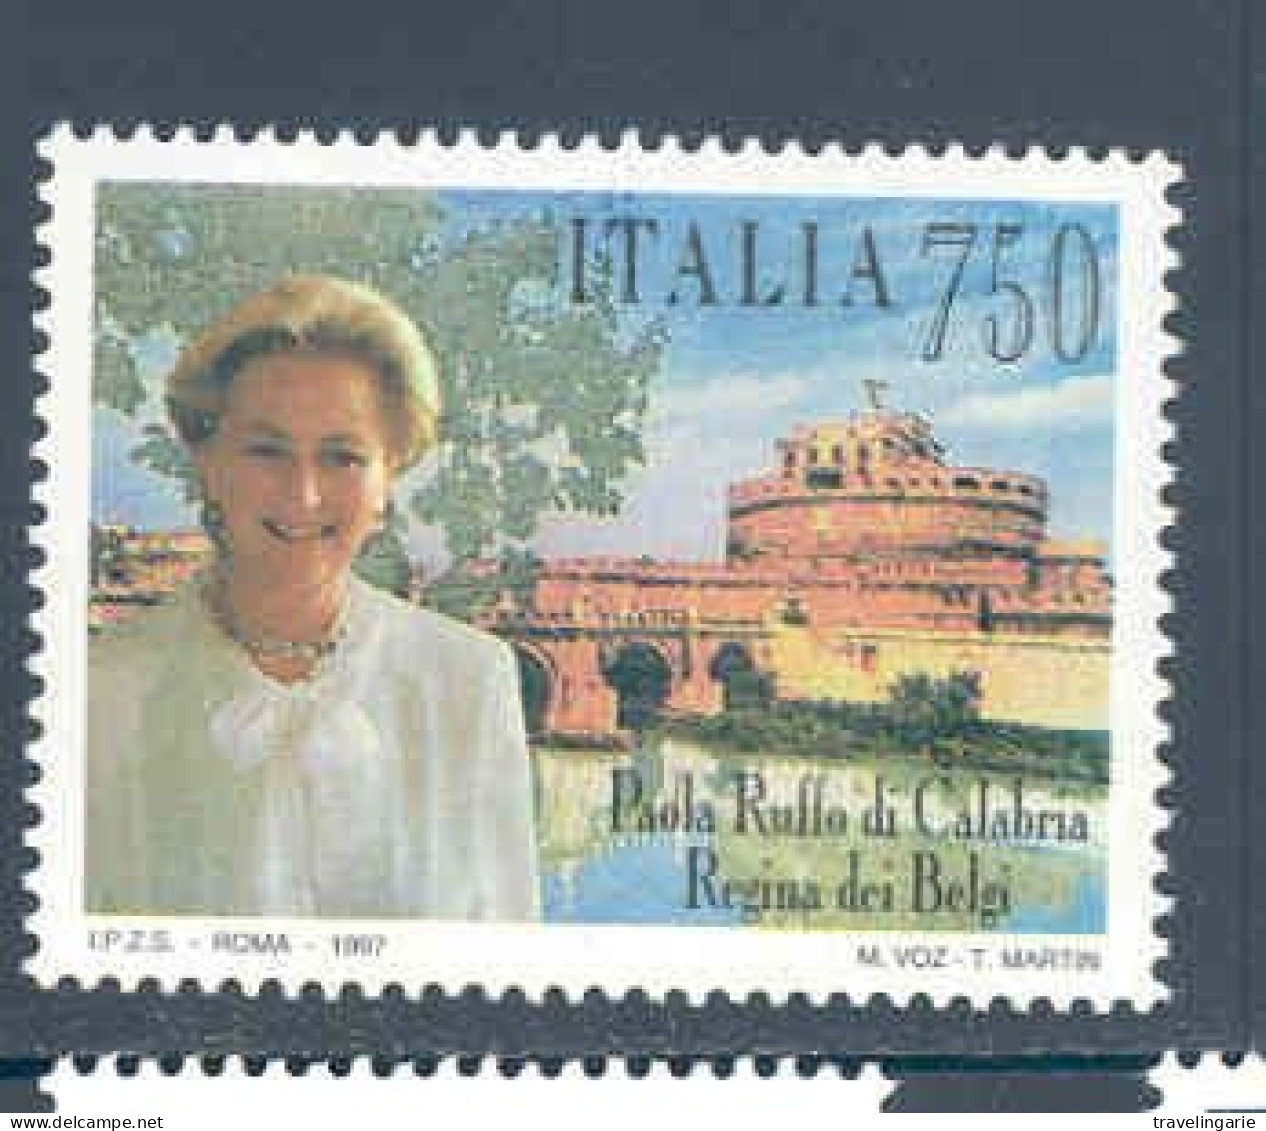 ITALY 1997 Queen Paola Of Belgium MNH ** - Familias Reales